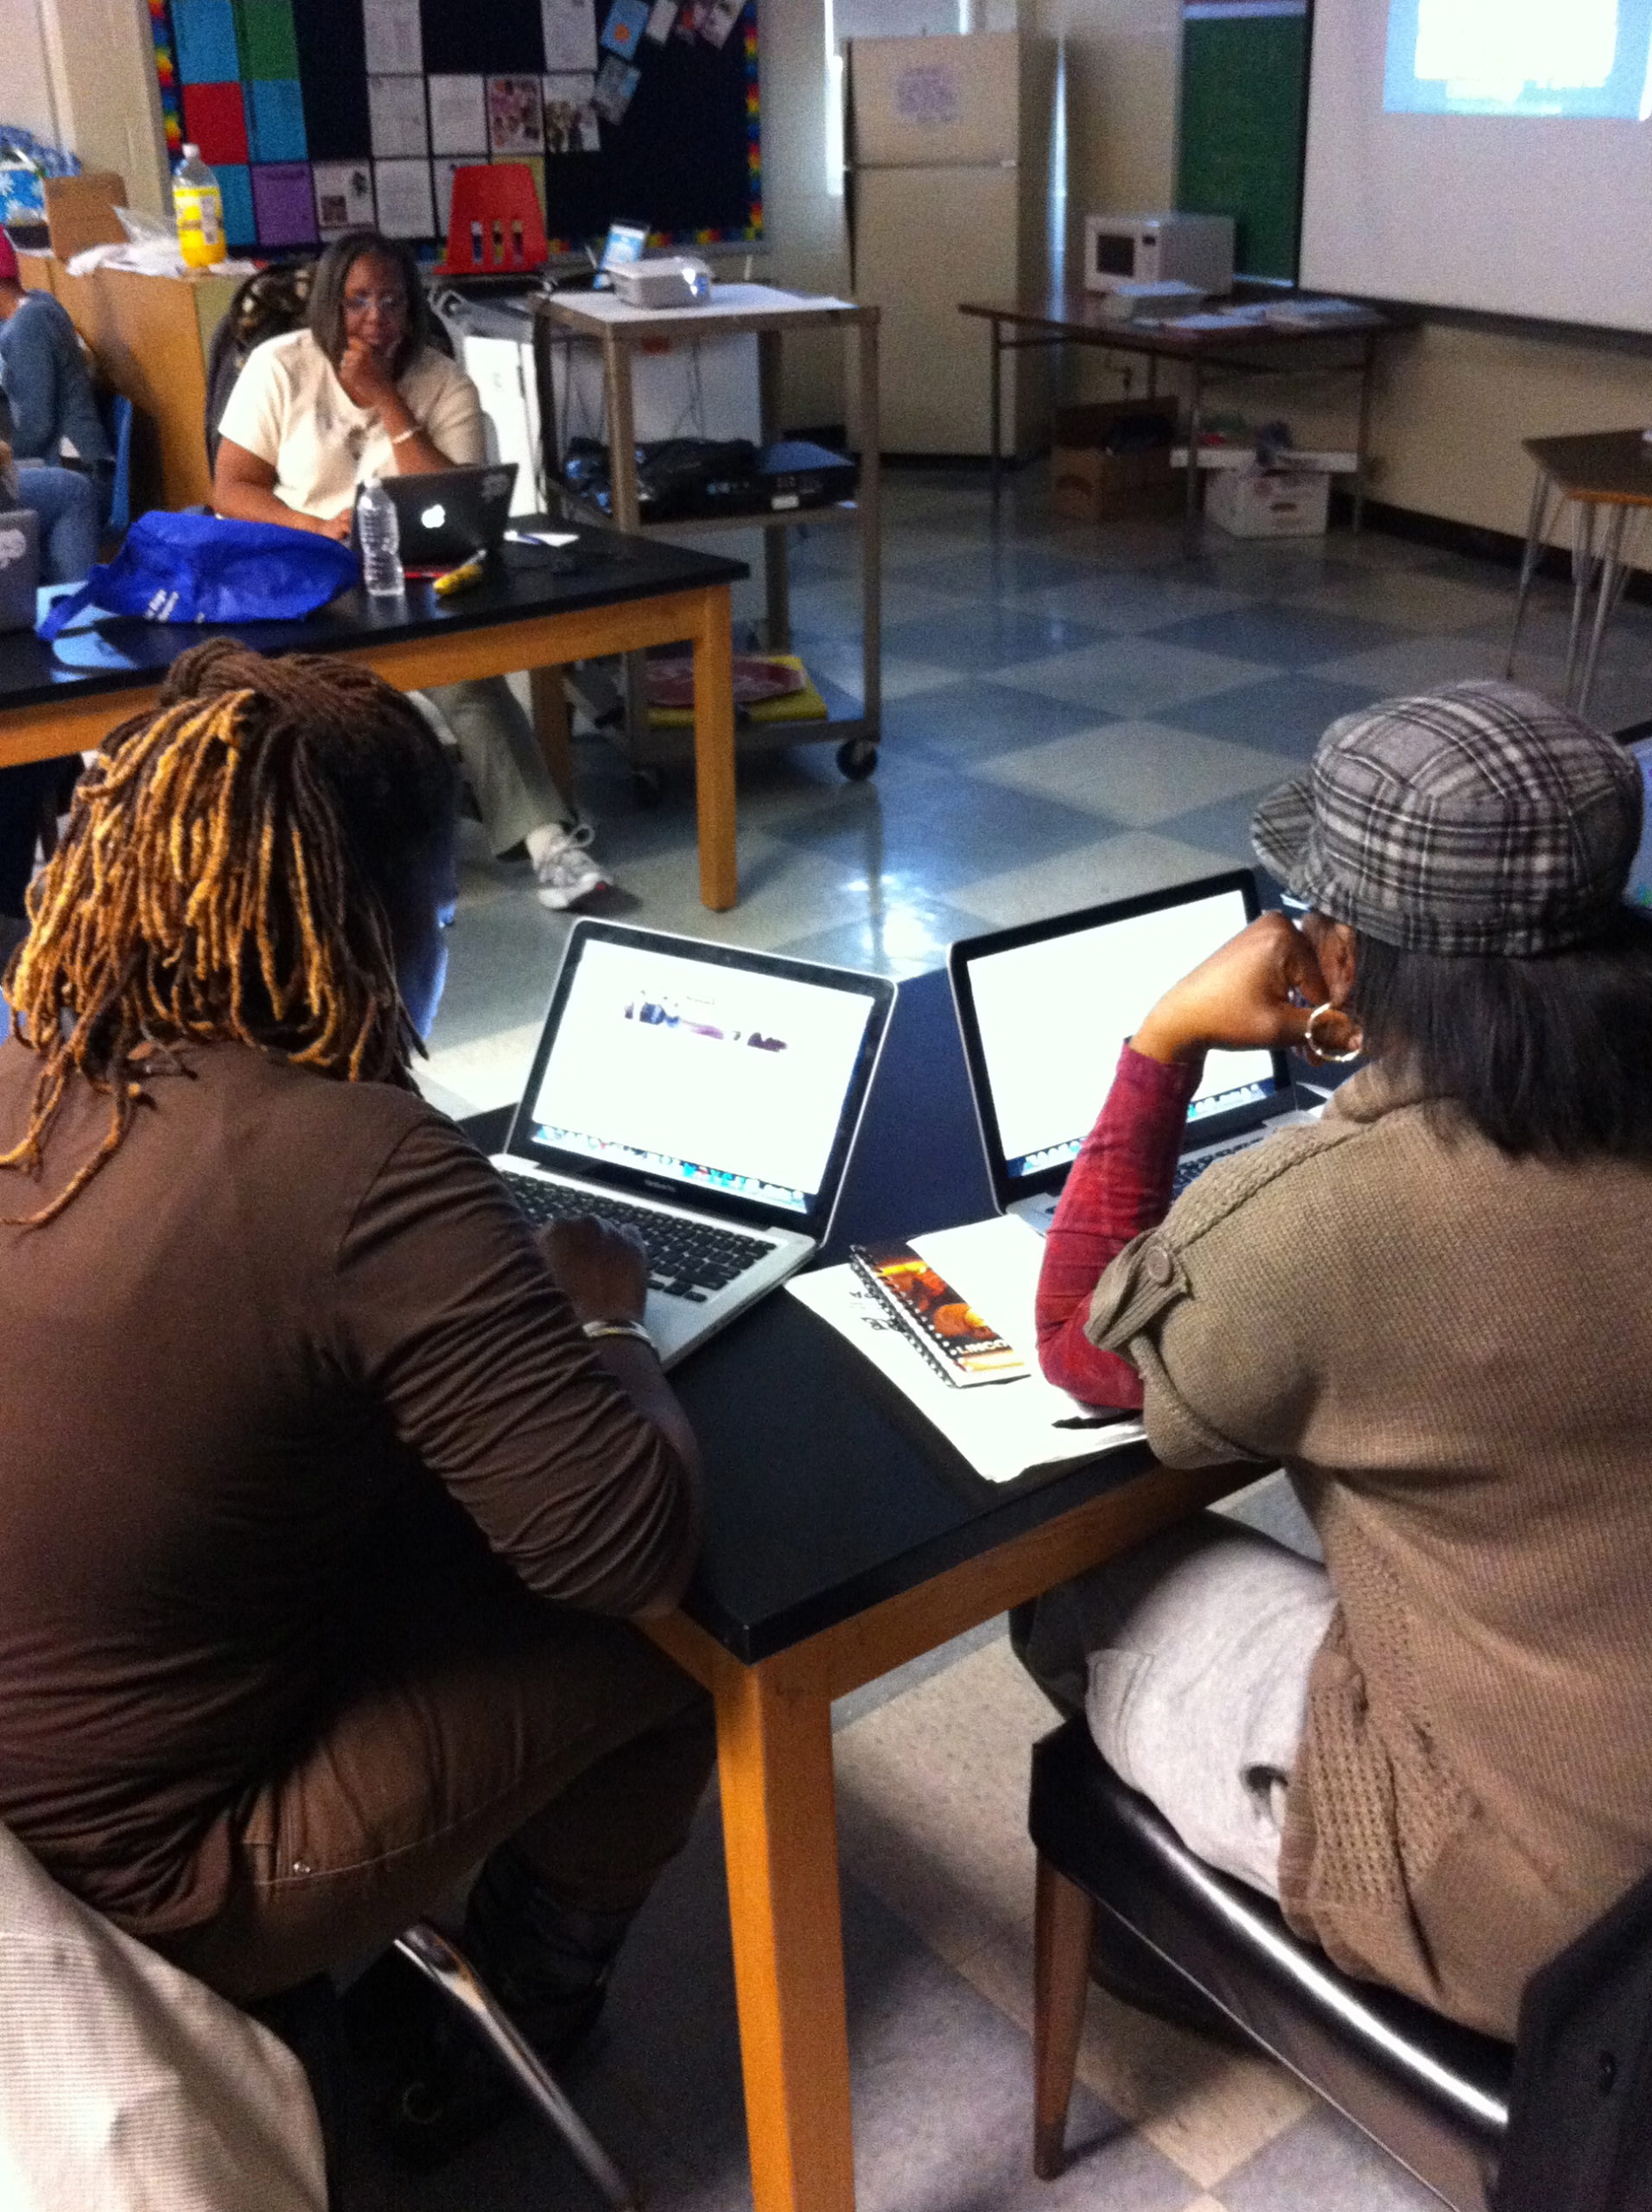 Inside the Philadelphia OIC’s “Blended Classroom” online GED training. Photo courtesy of Erich Smith.